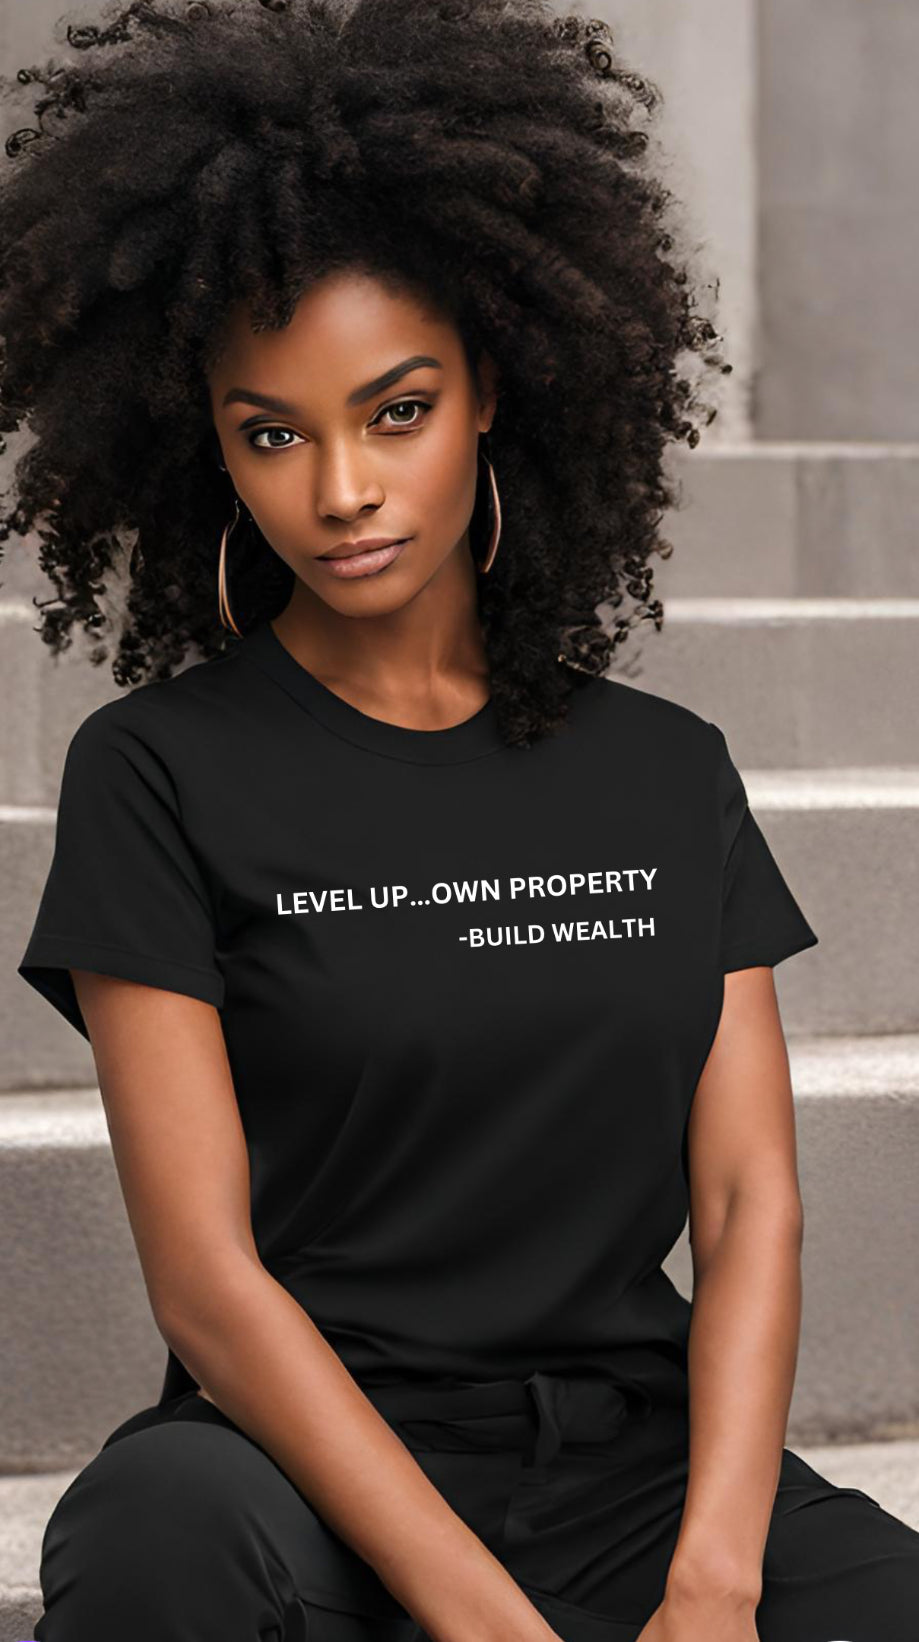 Level Up…Own Property